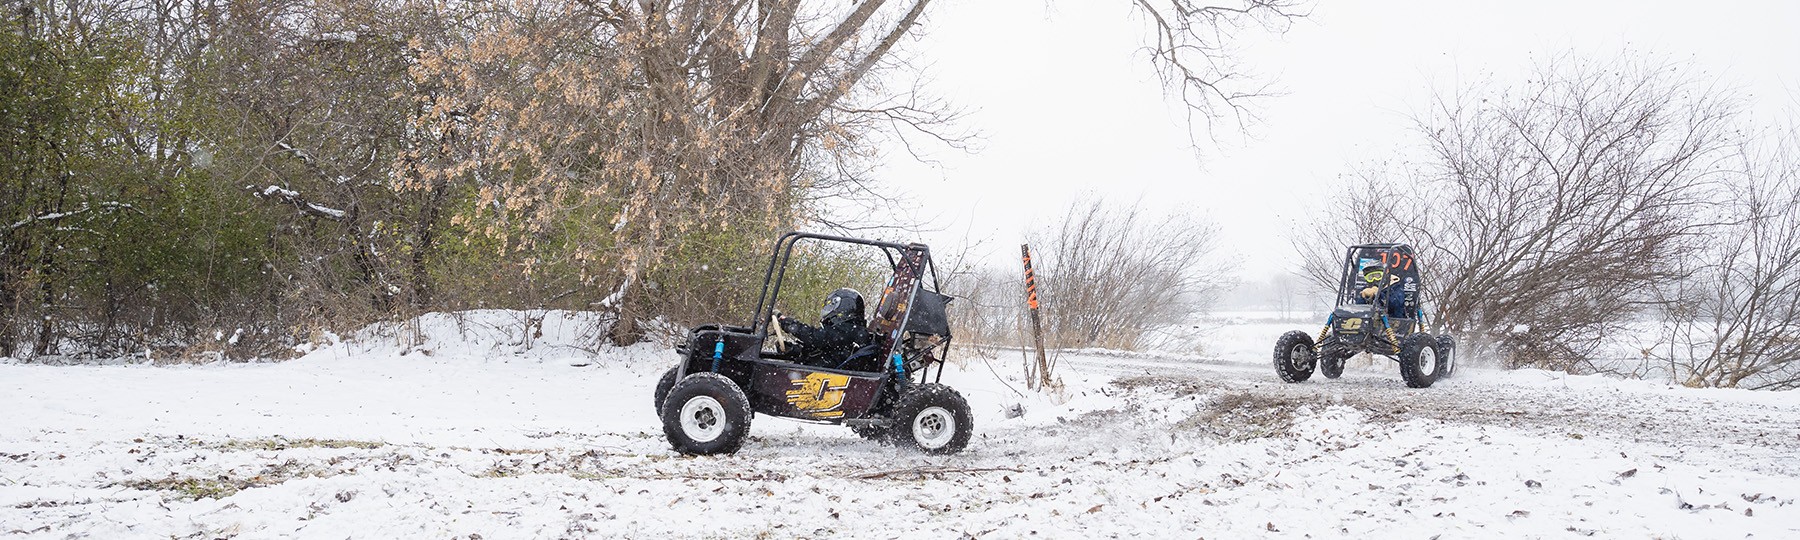 Two student-built baja cars driving on an off-road course on a snowy day.